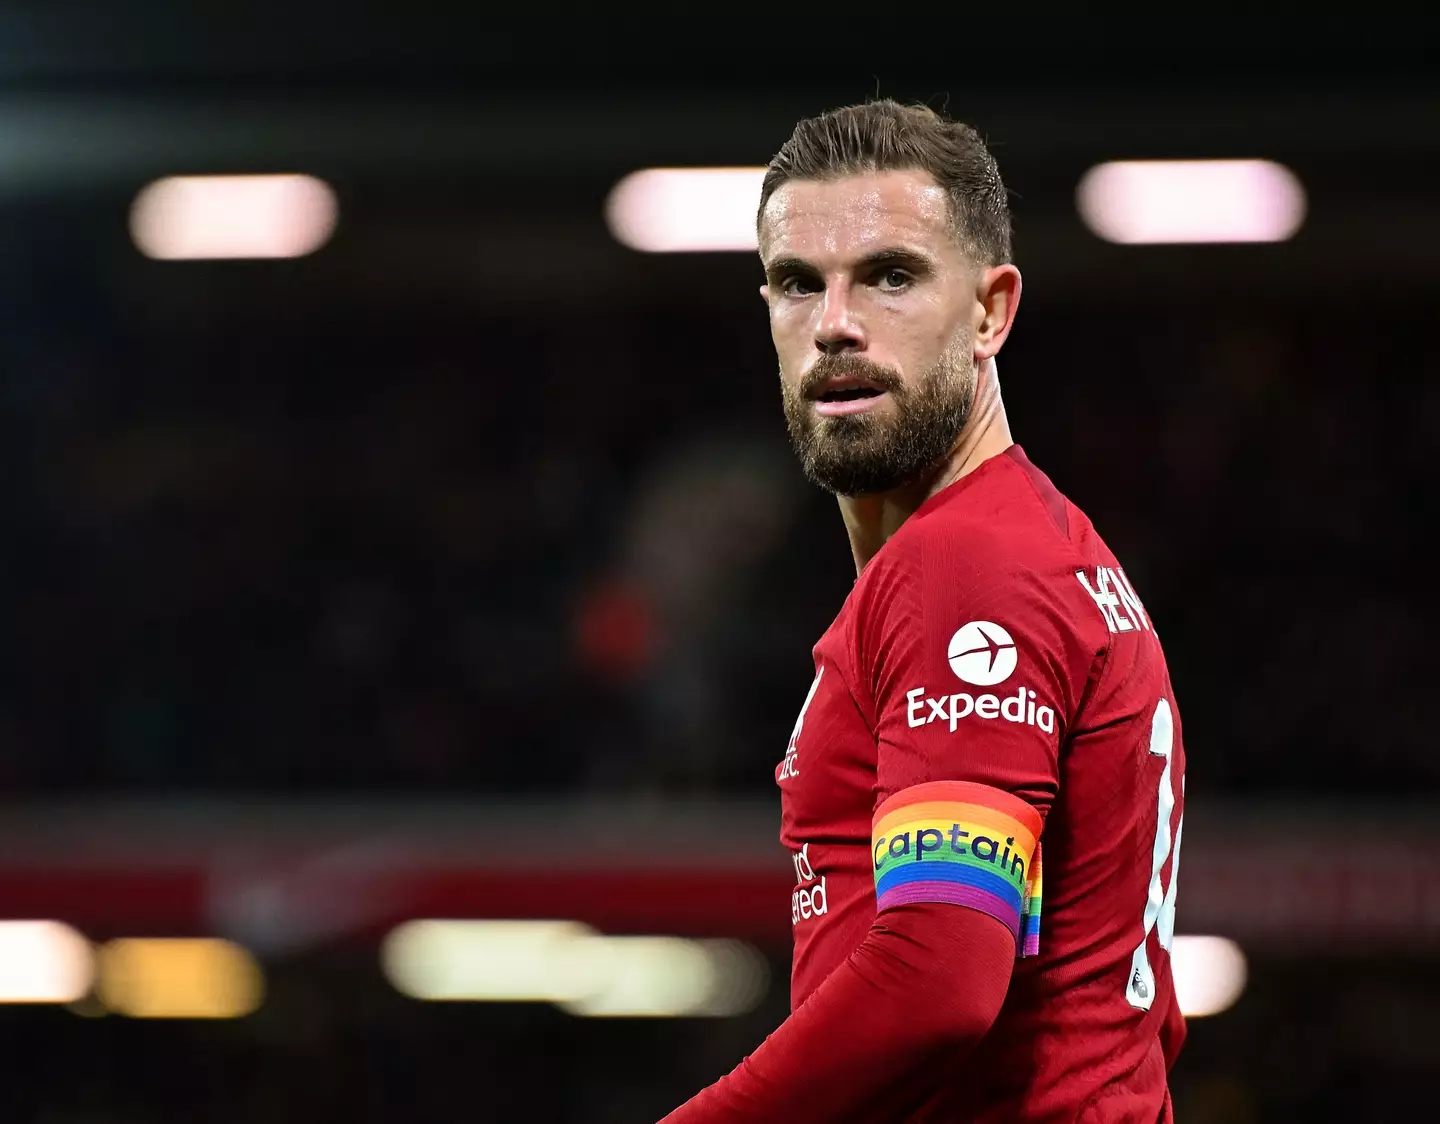 Henderson wearing a rainbow captain's armband in support of the LGBTQIA+ community. Image: Getty